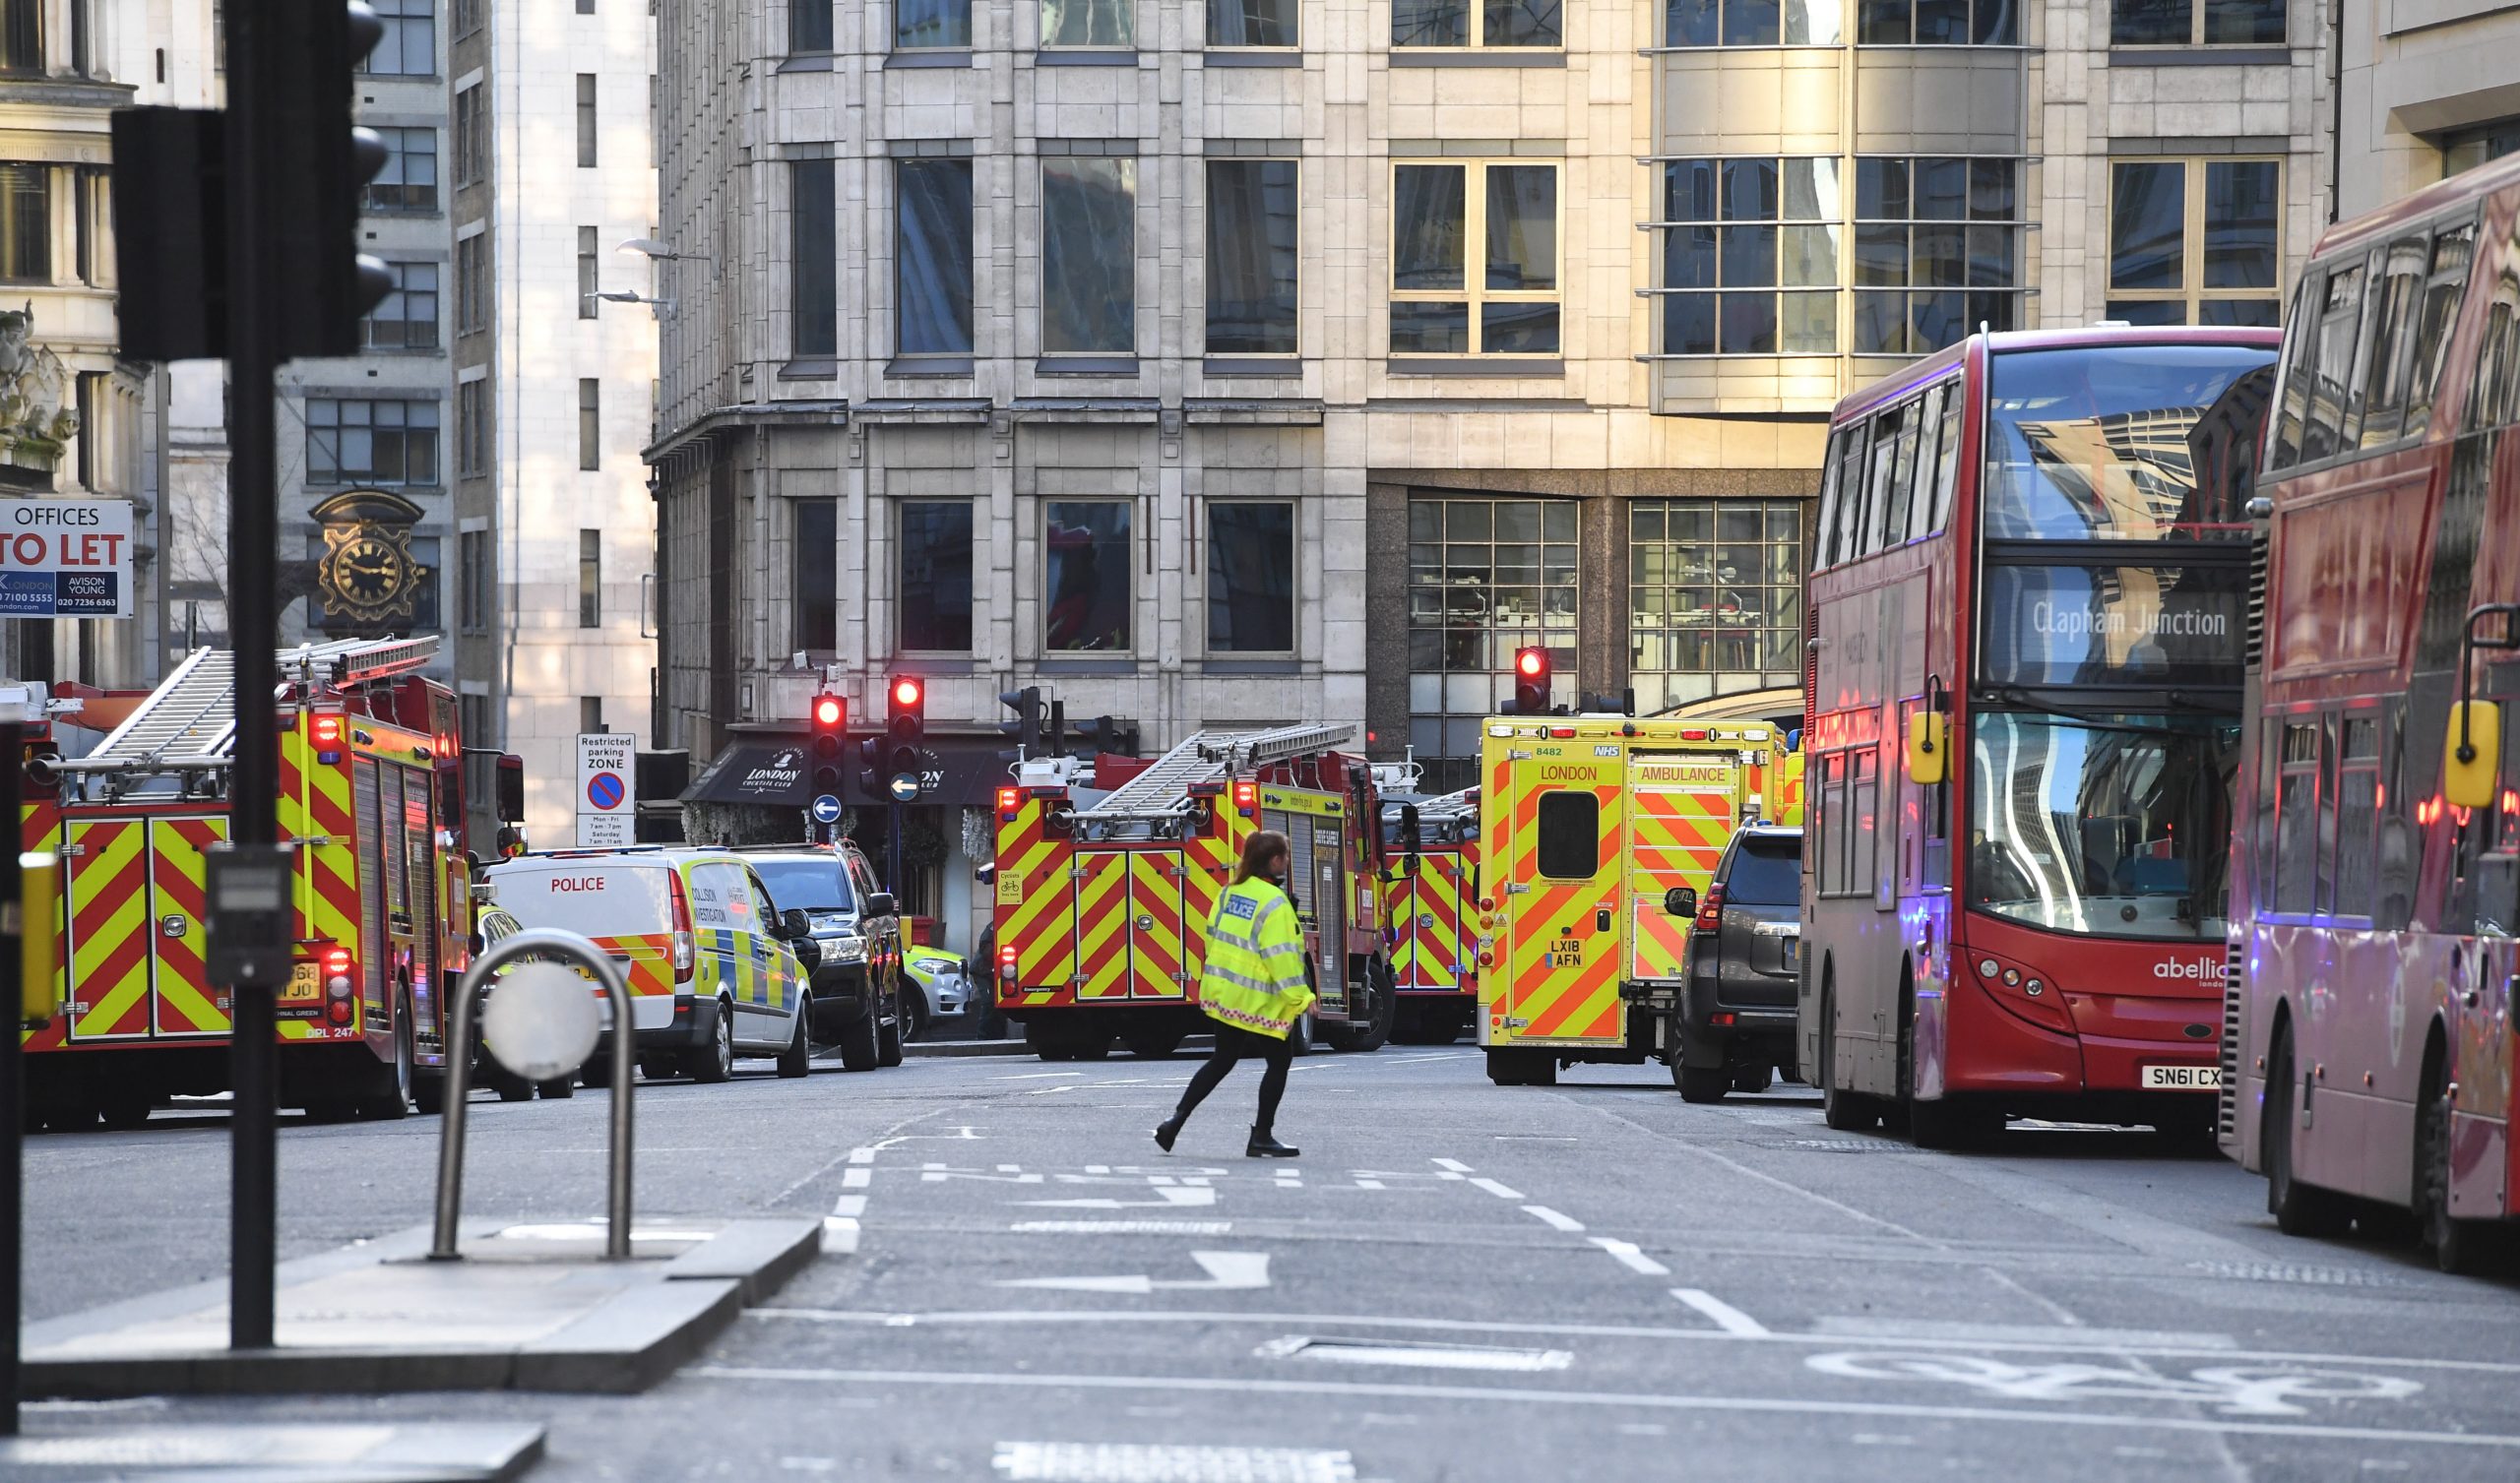 epa08033217 Police at the scene of an incident at London Bridge in London, Britain, 29 November 2019. According to reports, a man has been detained after police officers were called to a stabbing at London Bridge. Several people have been injured.  EPA/FACUNDO ARRIZABALAGA